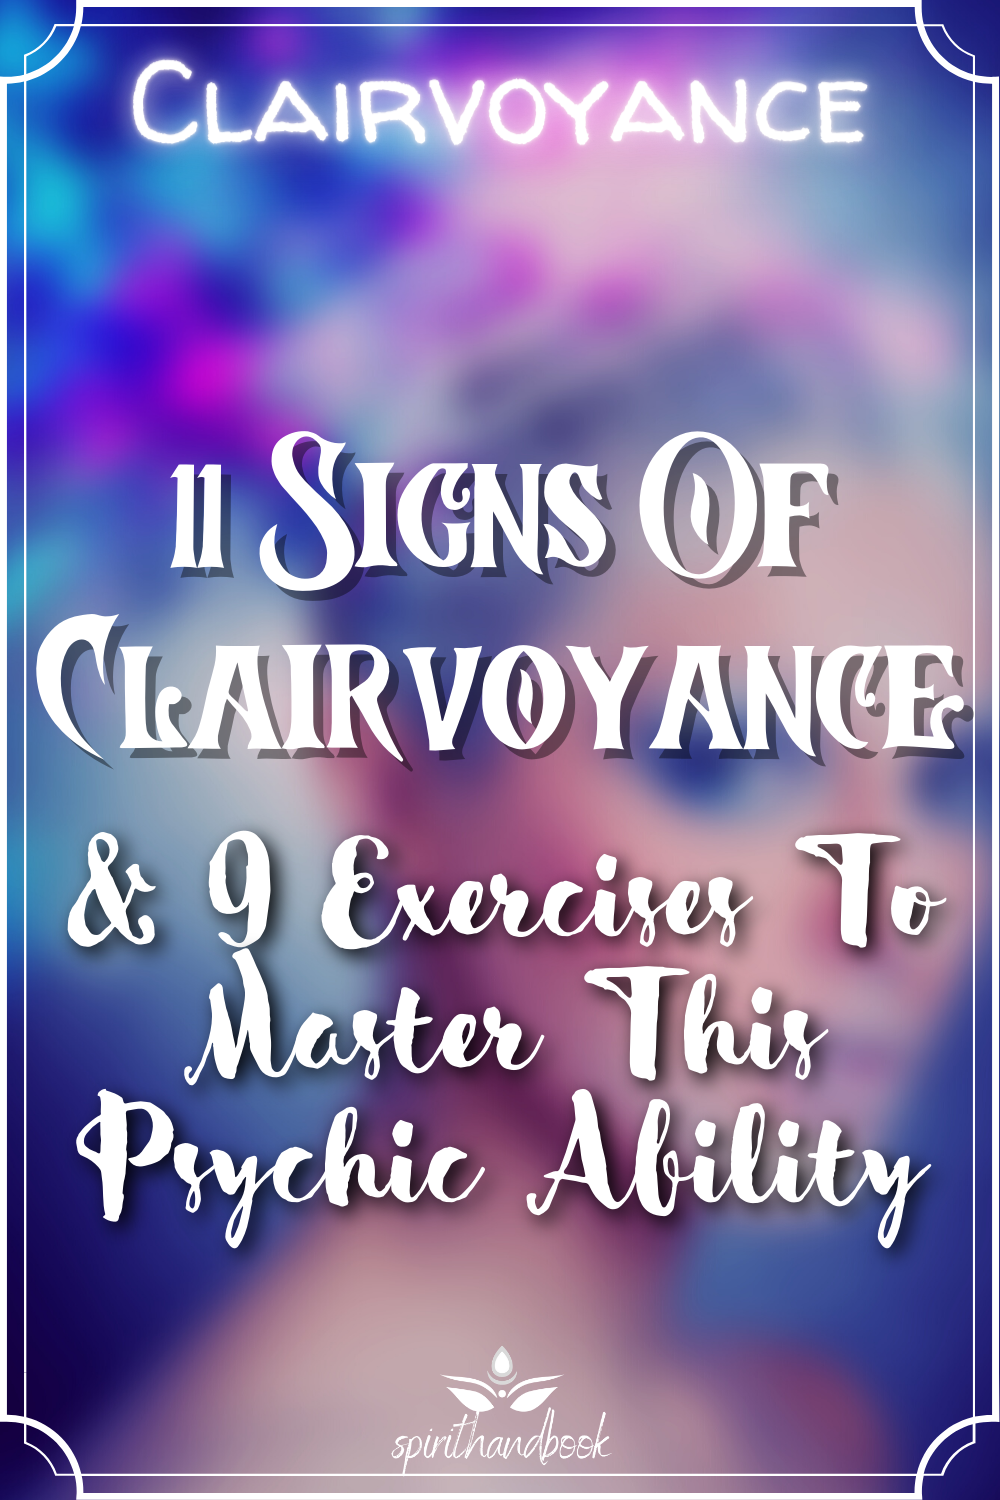 You are currently viewing 11 Signs of Clairvoyance And 9 Effective Exercises